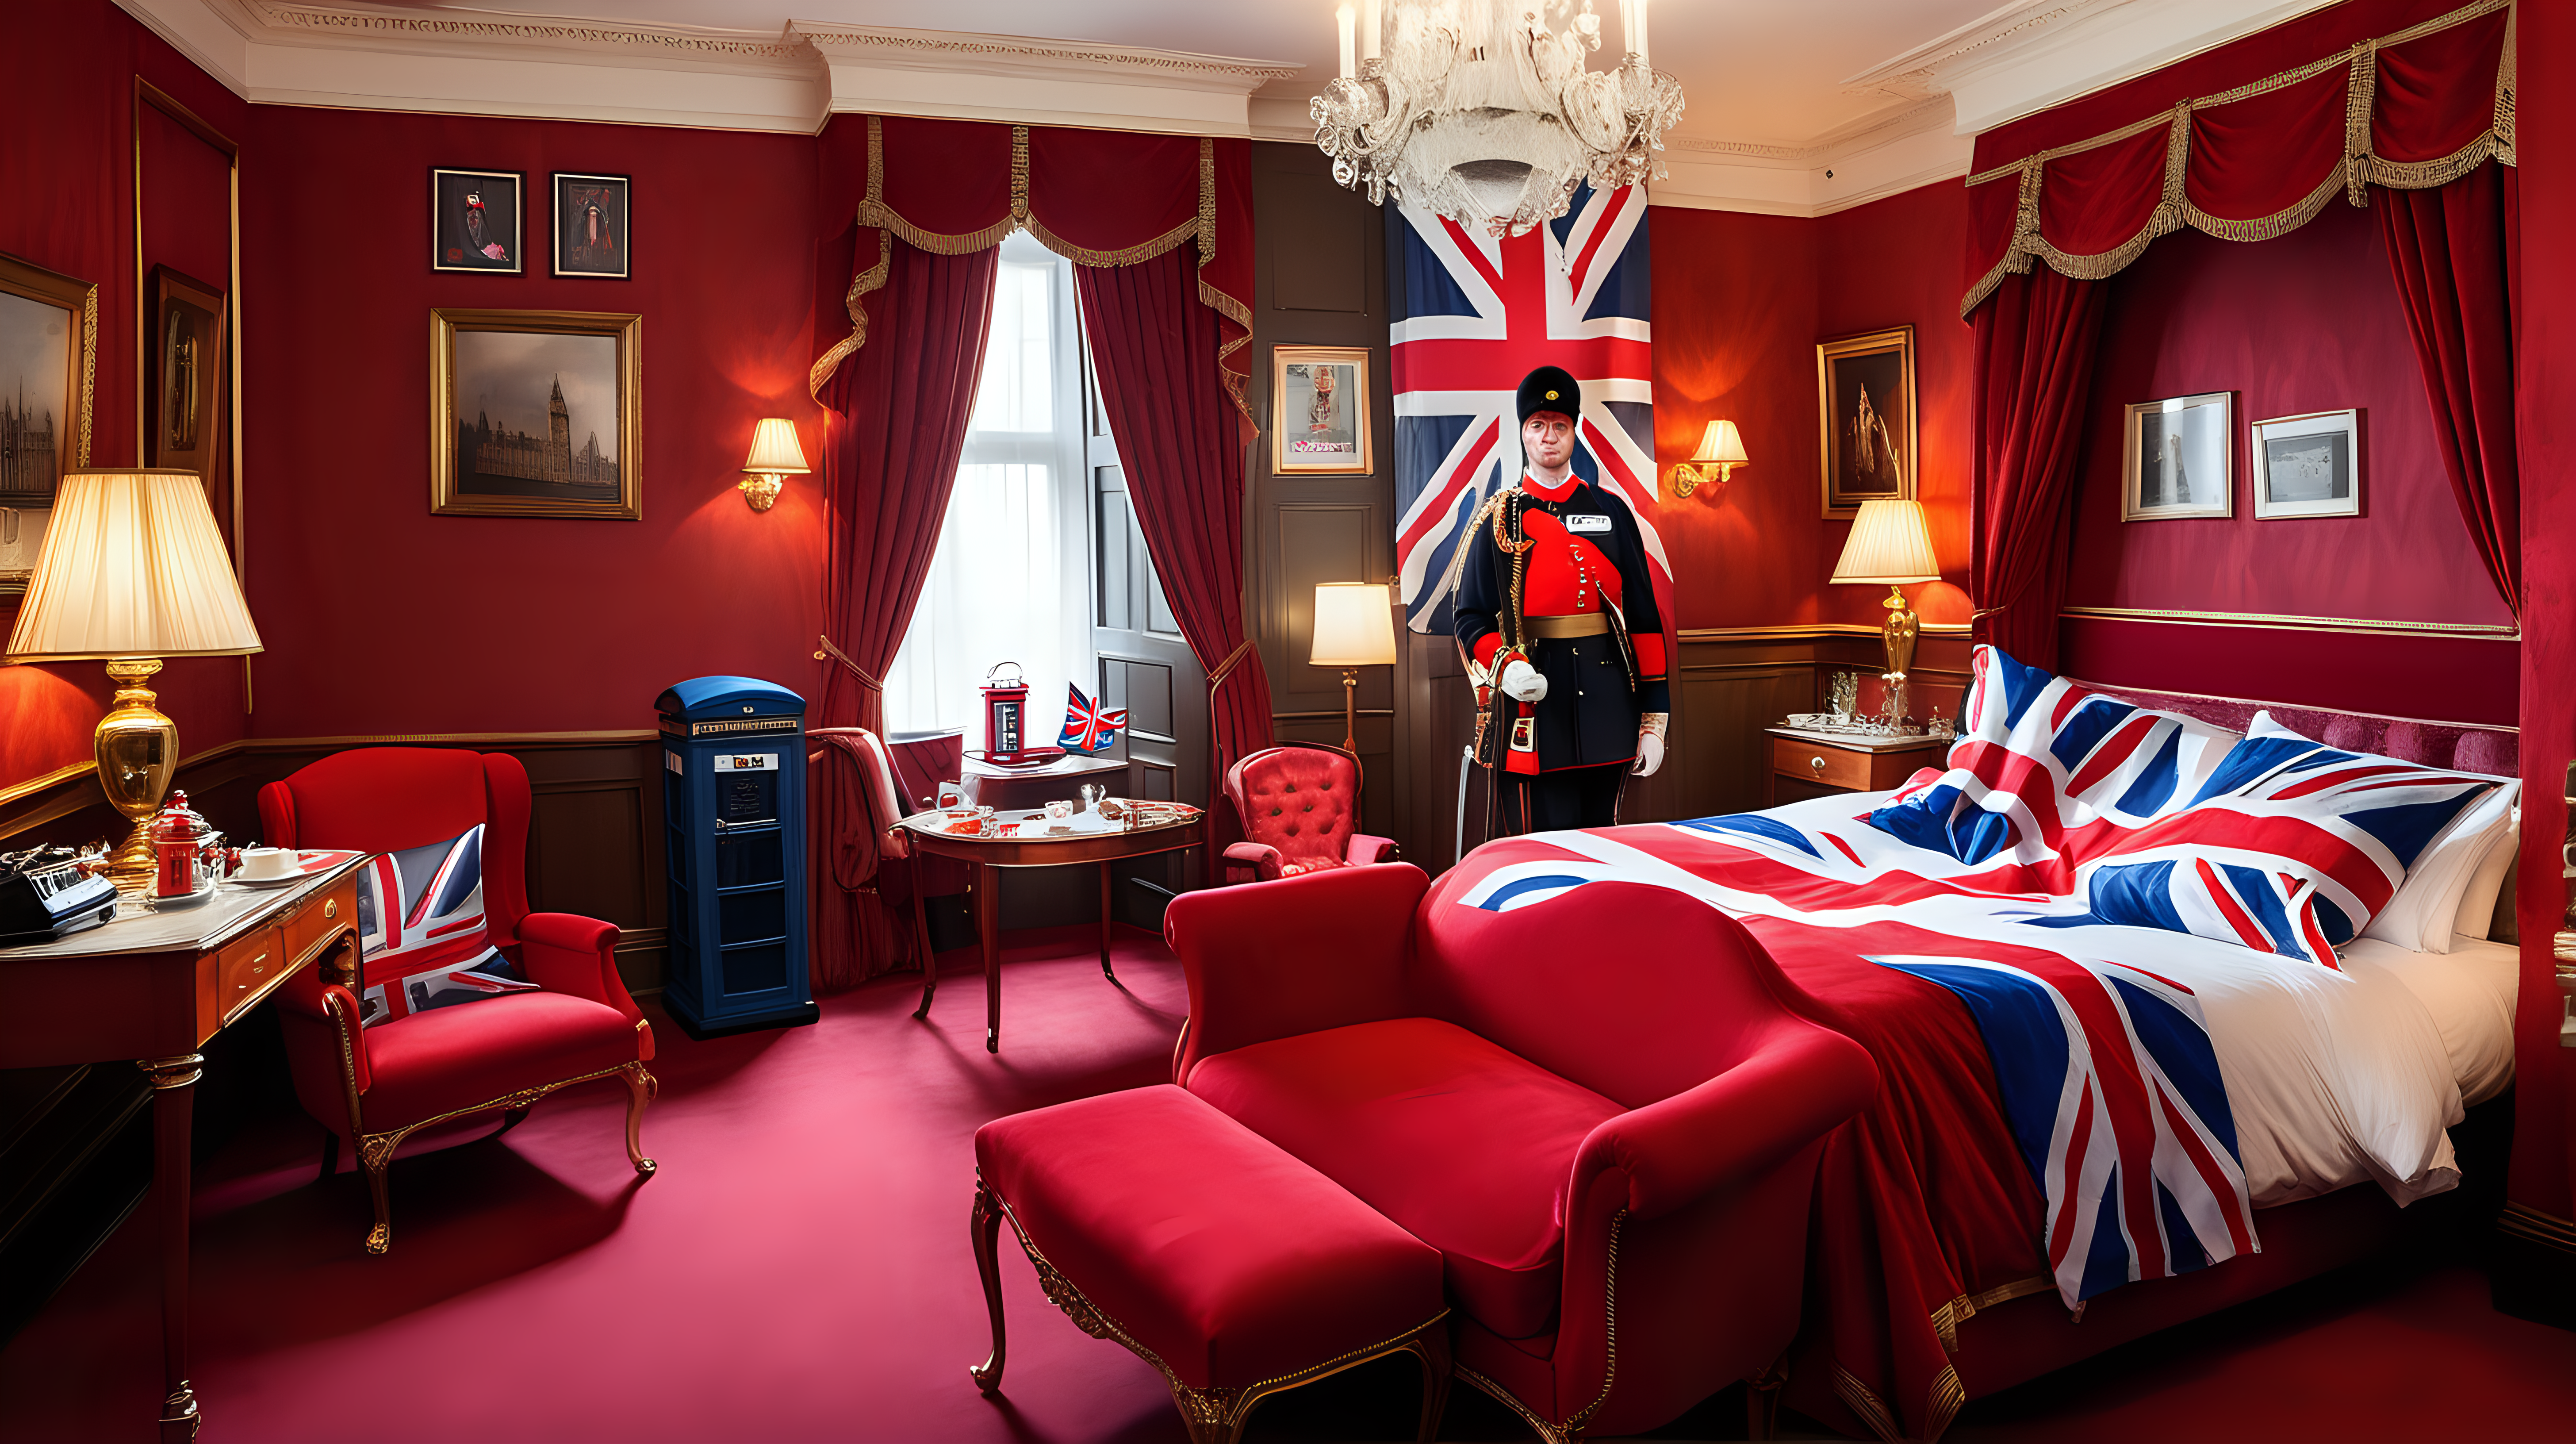 very royal Hotel room decorated over the top